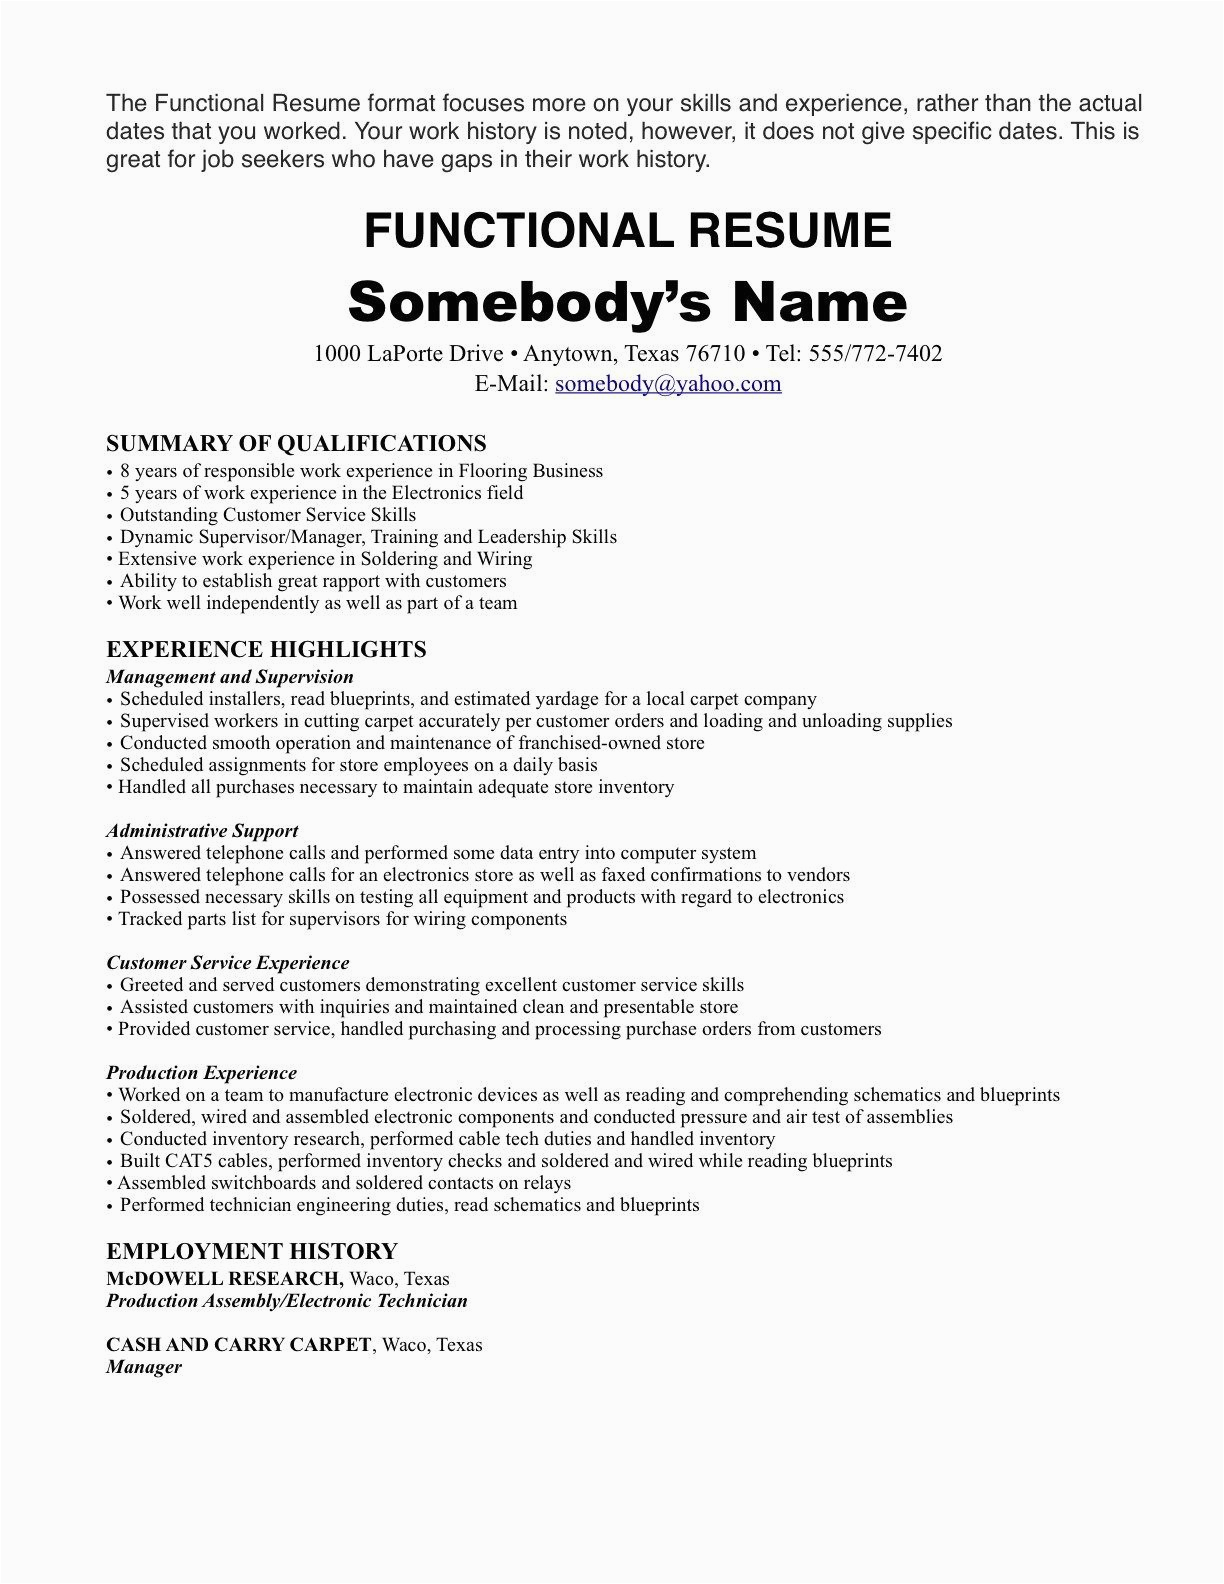 Sample Resume with Only One Job E Job